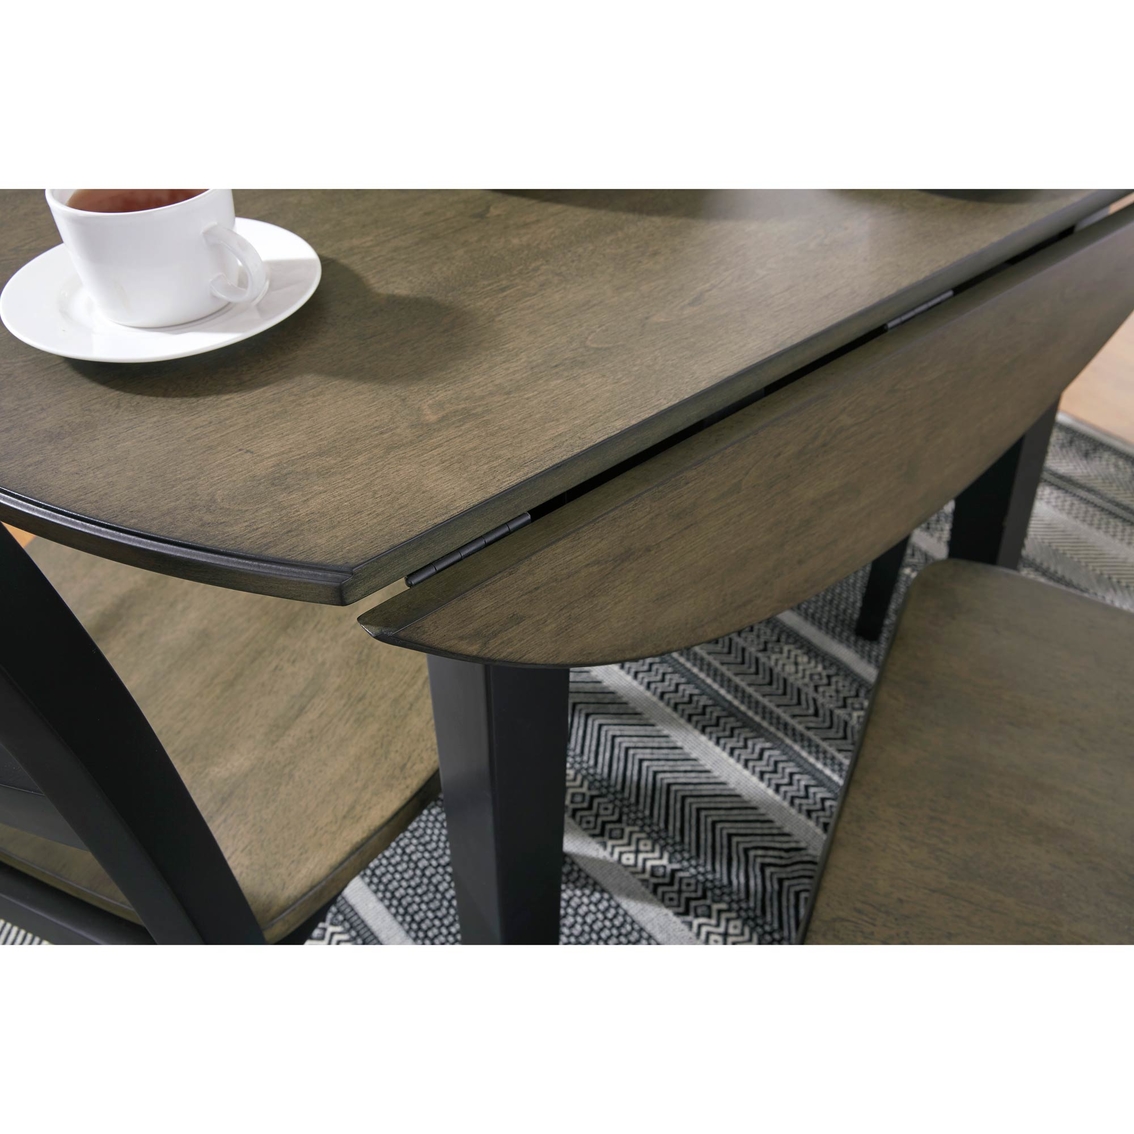 Signature Design by Ashley Froshburg Round Drop Leaf Dining Table - Image 2 of 3